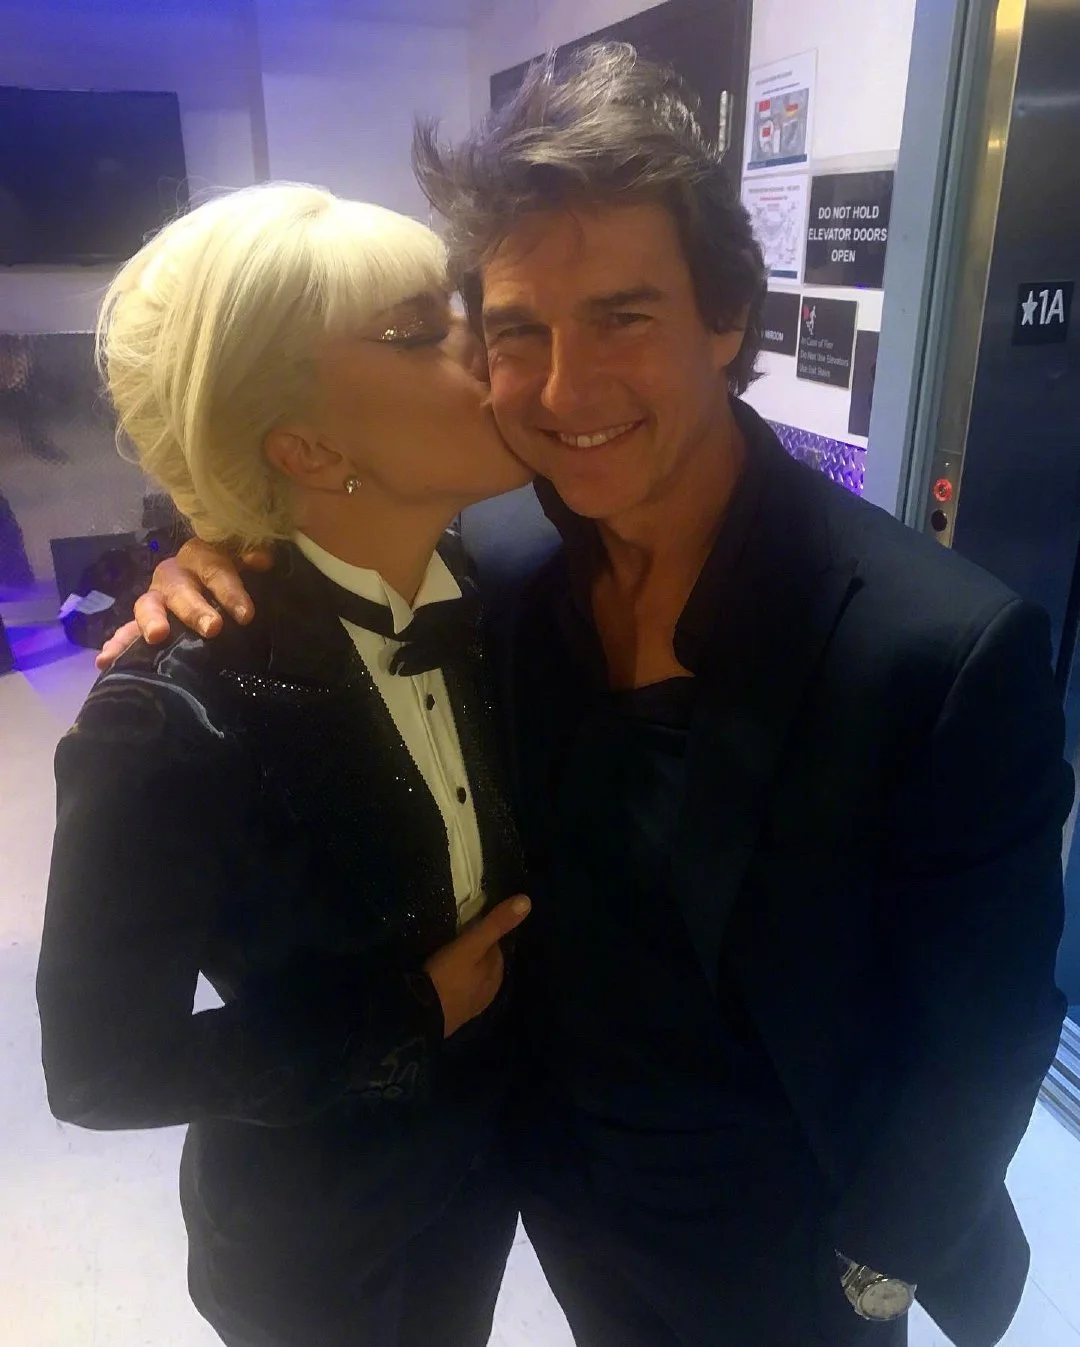 Lady Gaga shares photo with Tom Cruise, kisses each other on the cheek